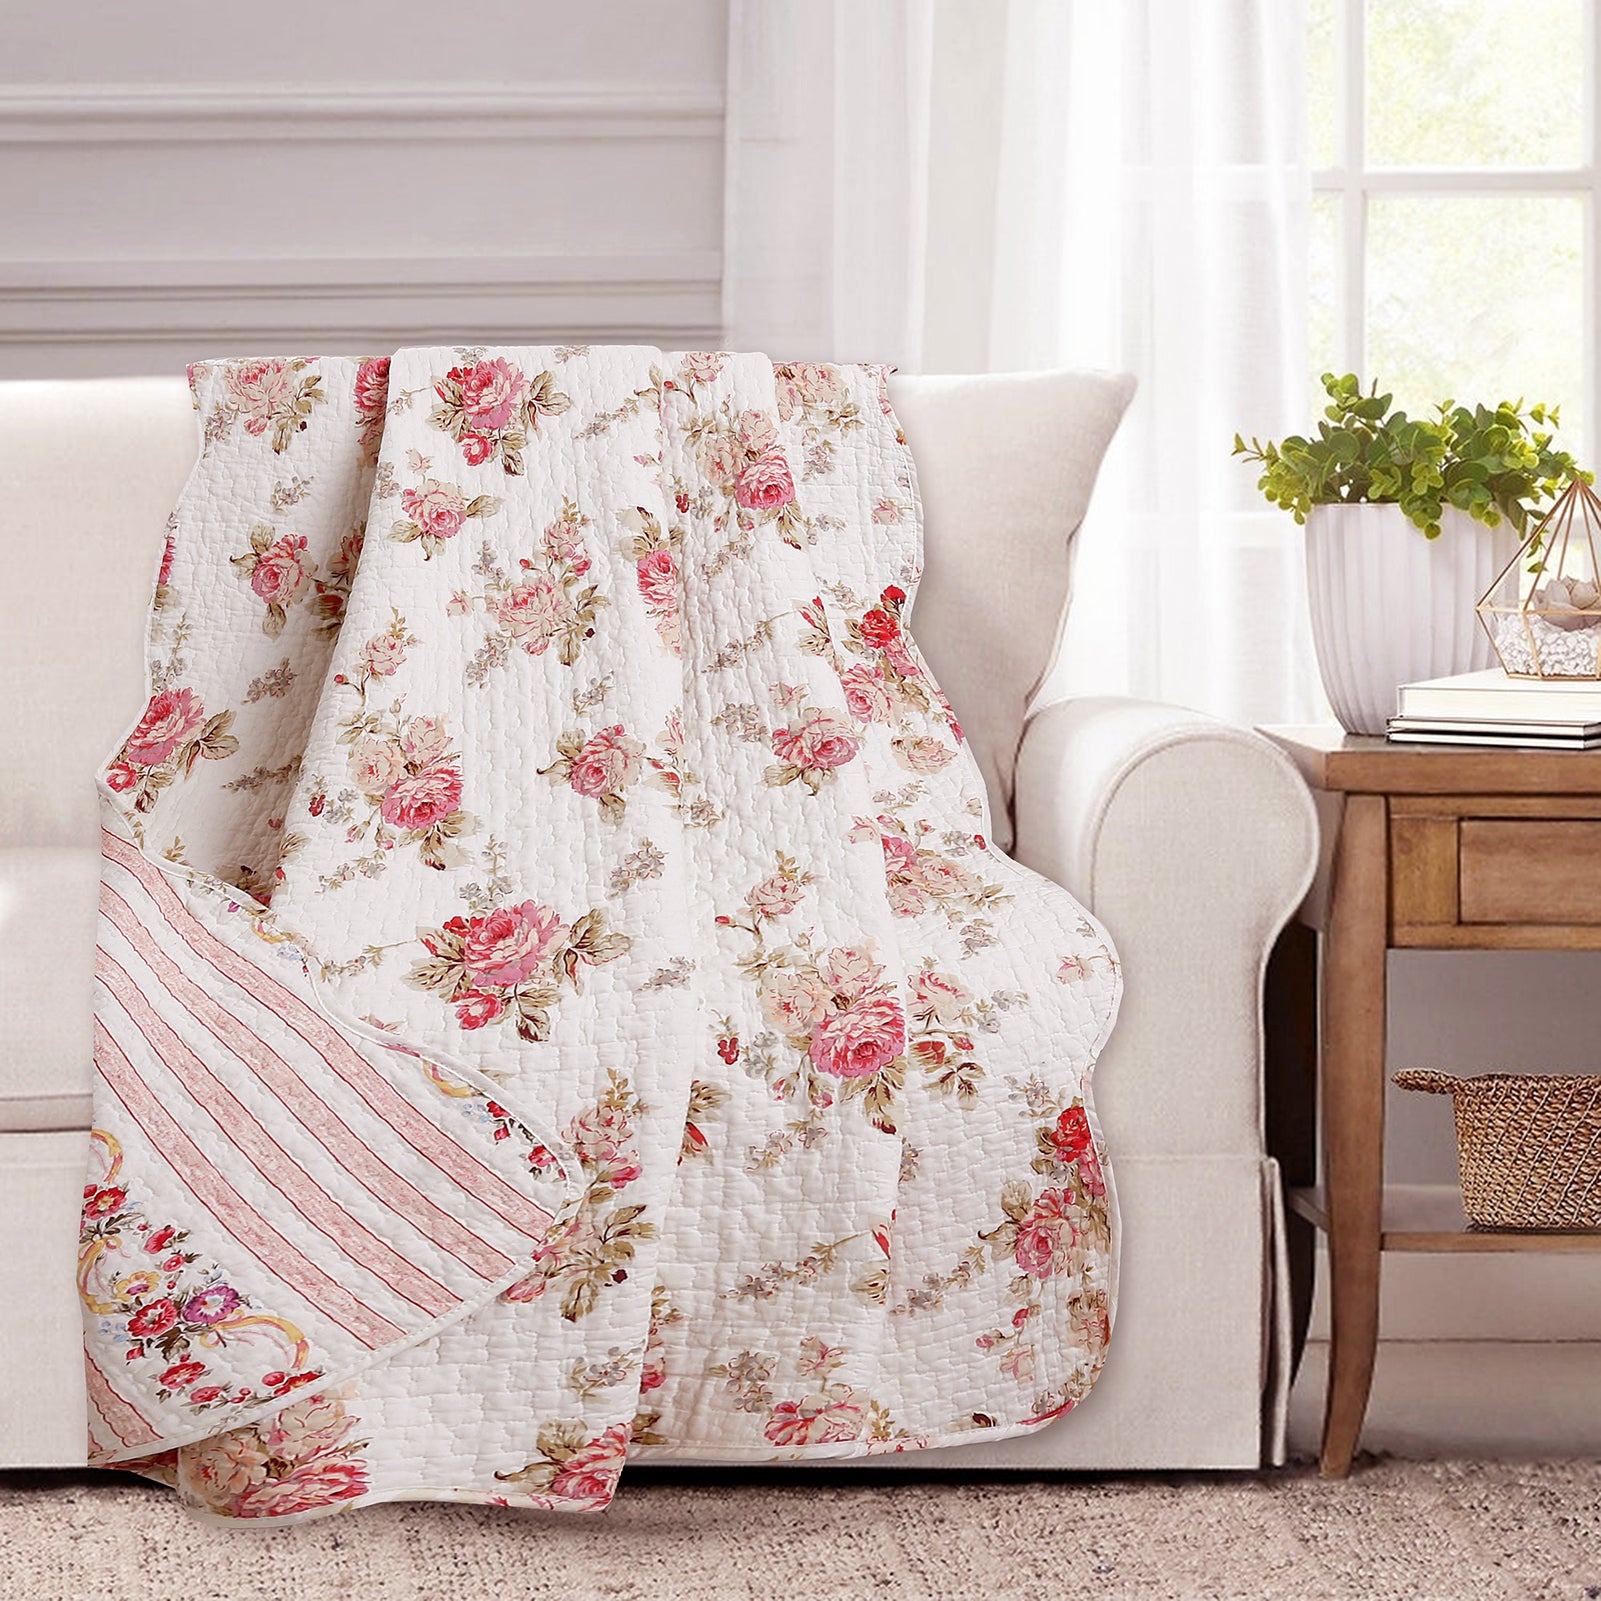 Spring Rose Floral Scalloped Cotton Quilted Reversible Decor Throw Bla –  Cozy Line Home Fashions